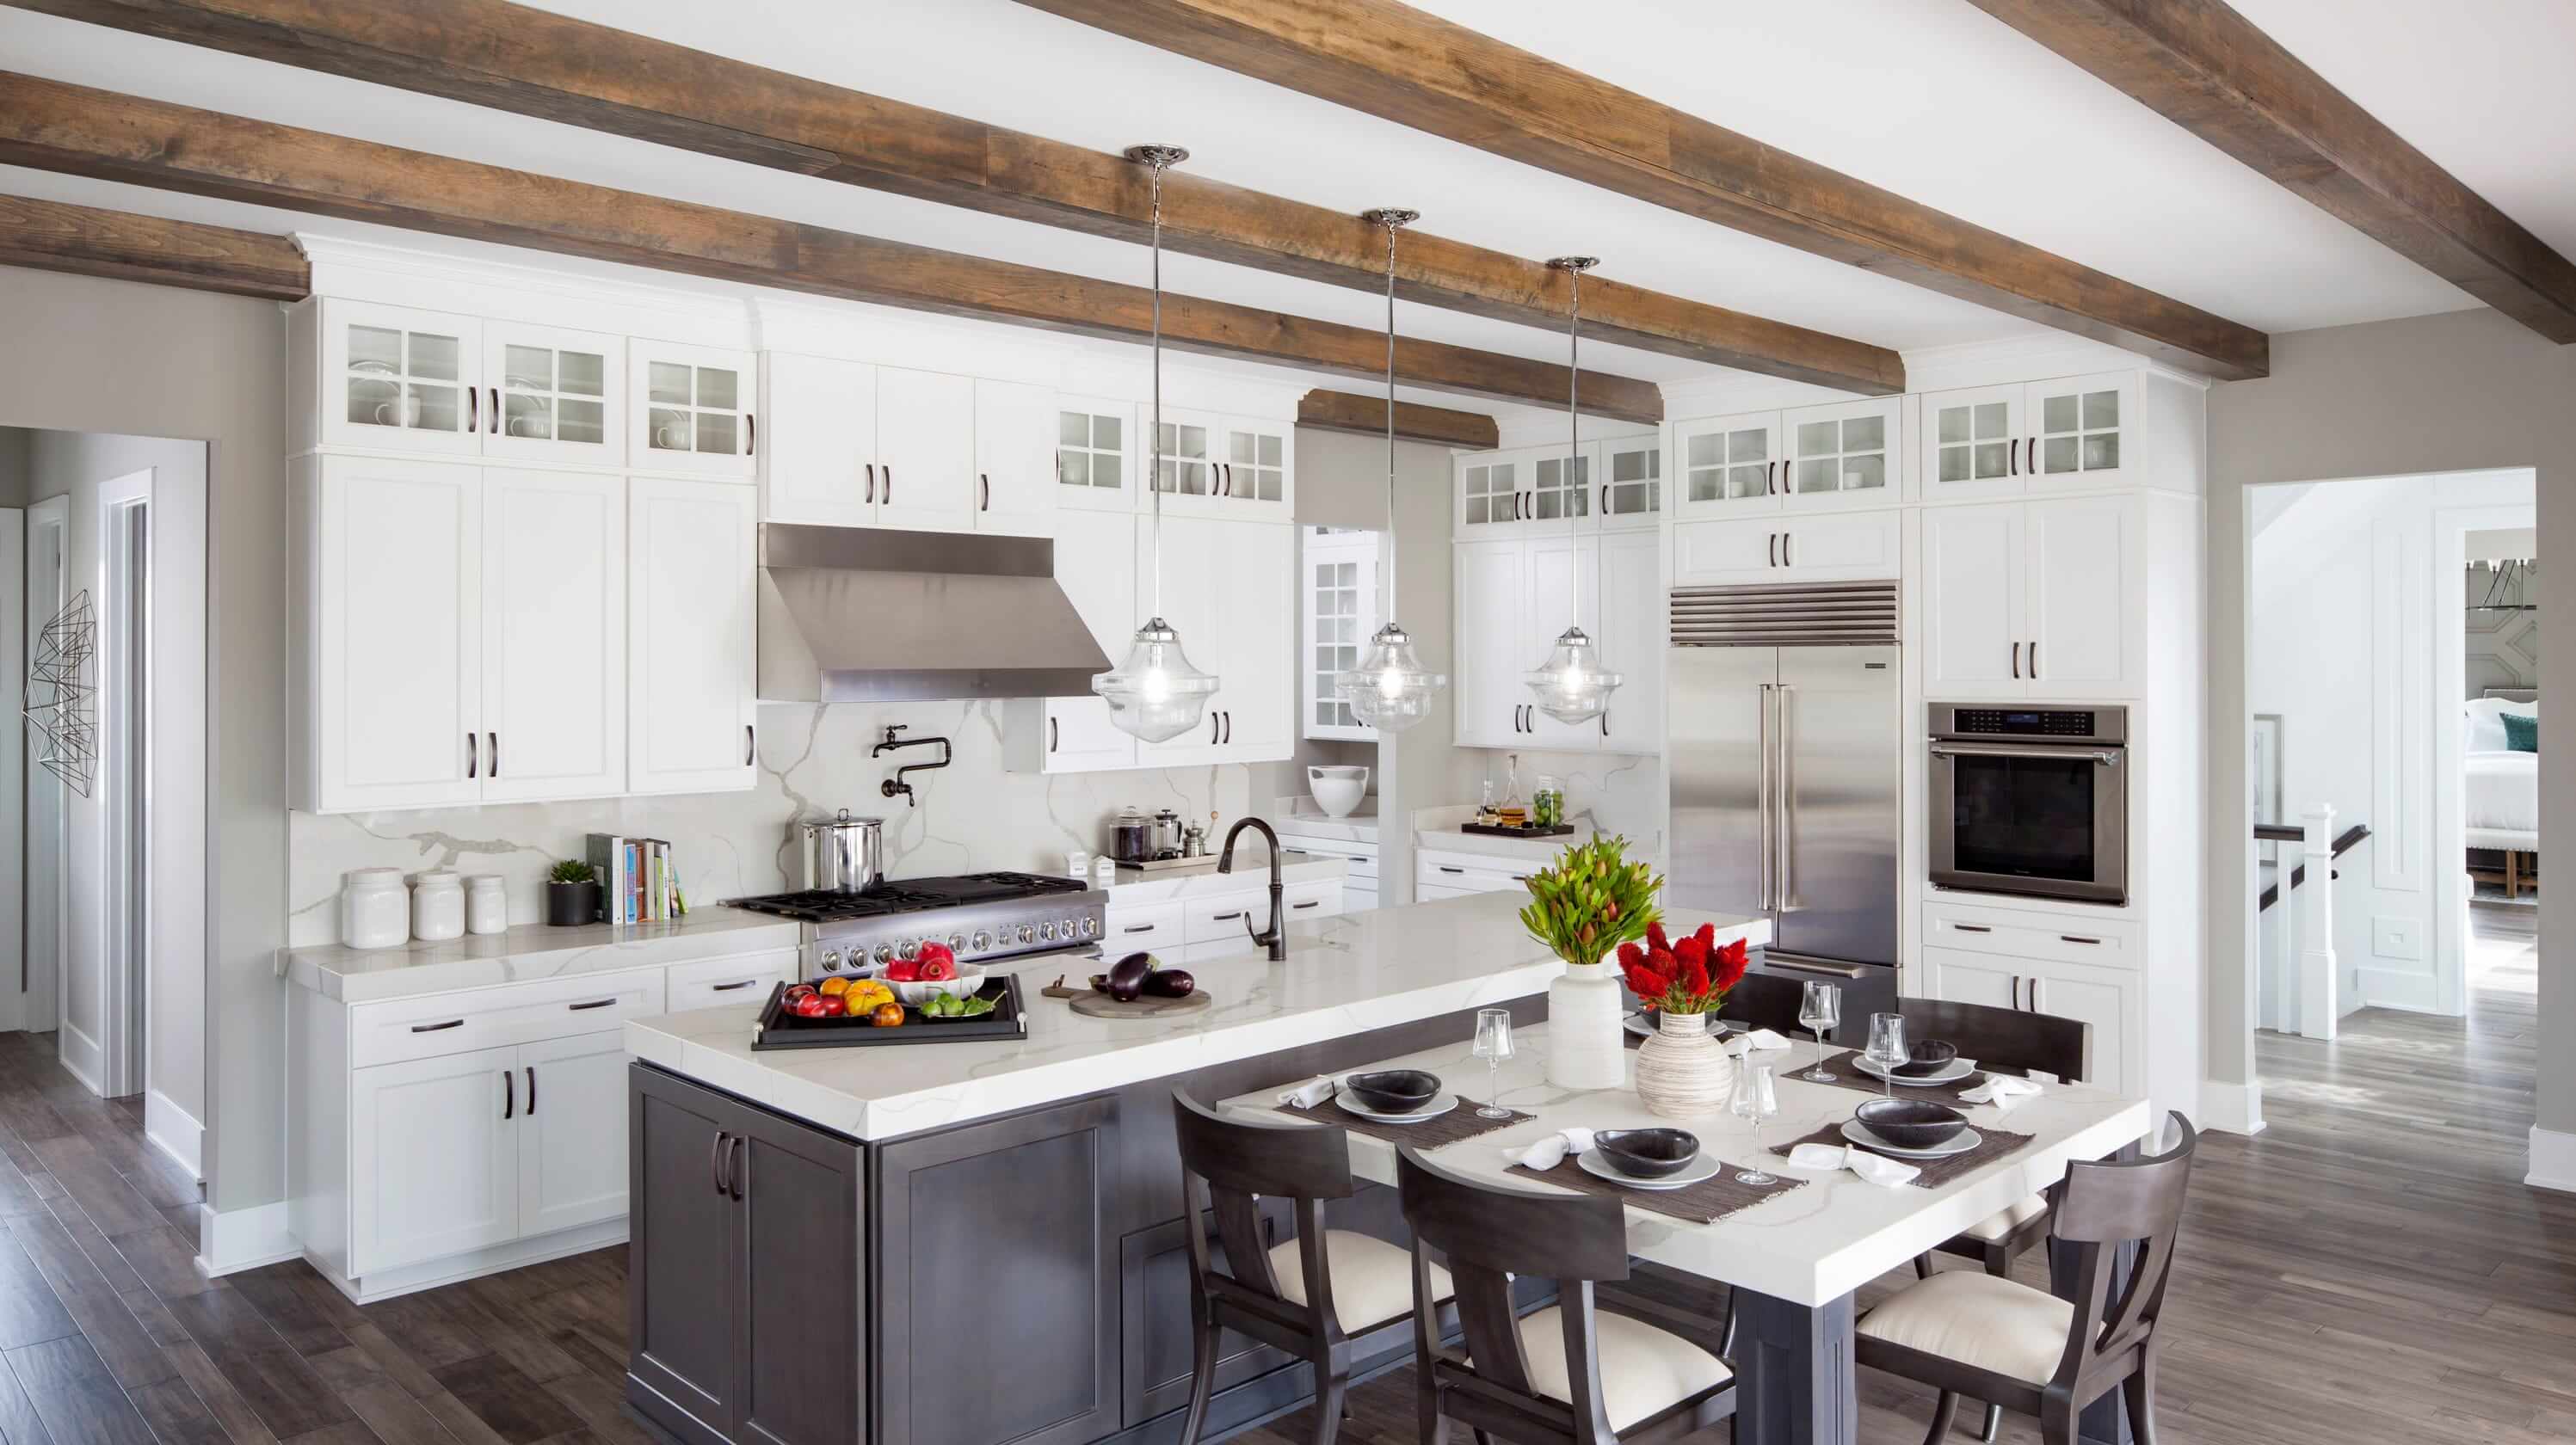 Exposed Beams & Cabinets